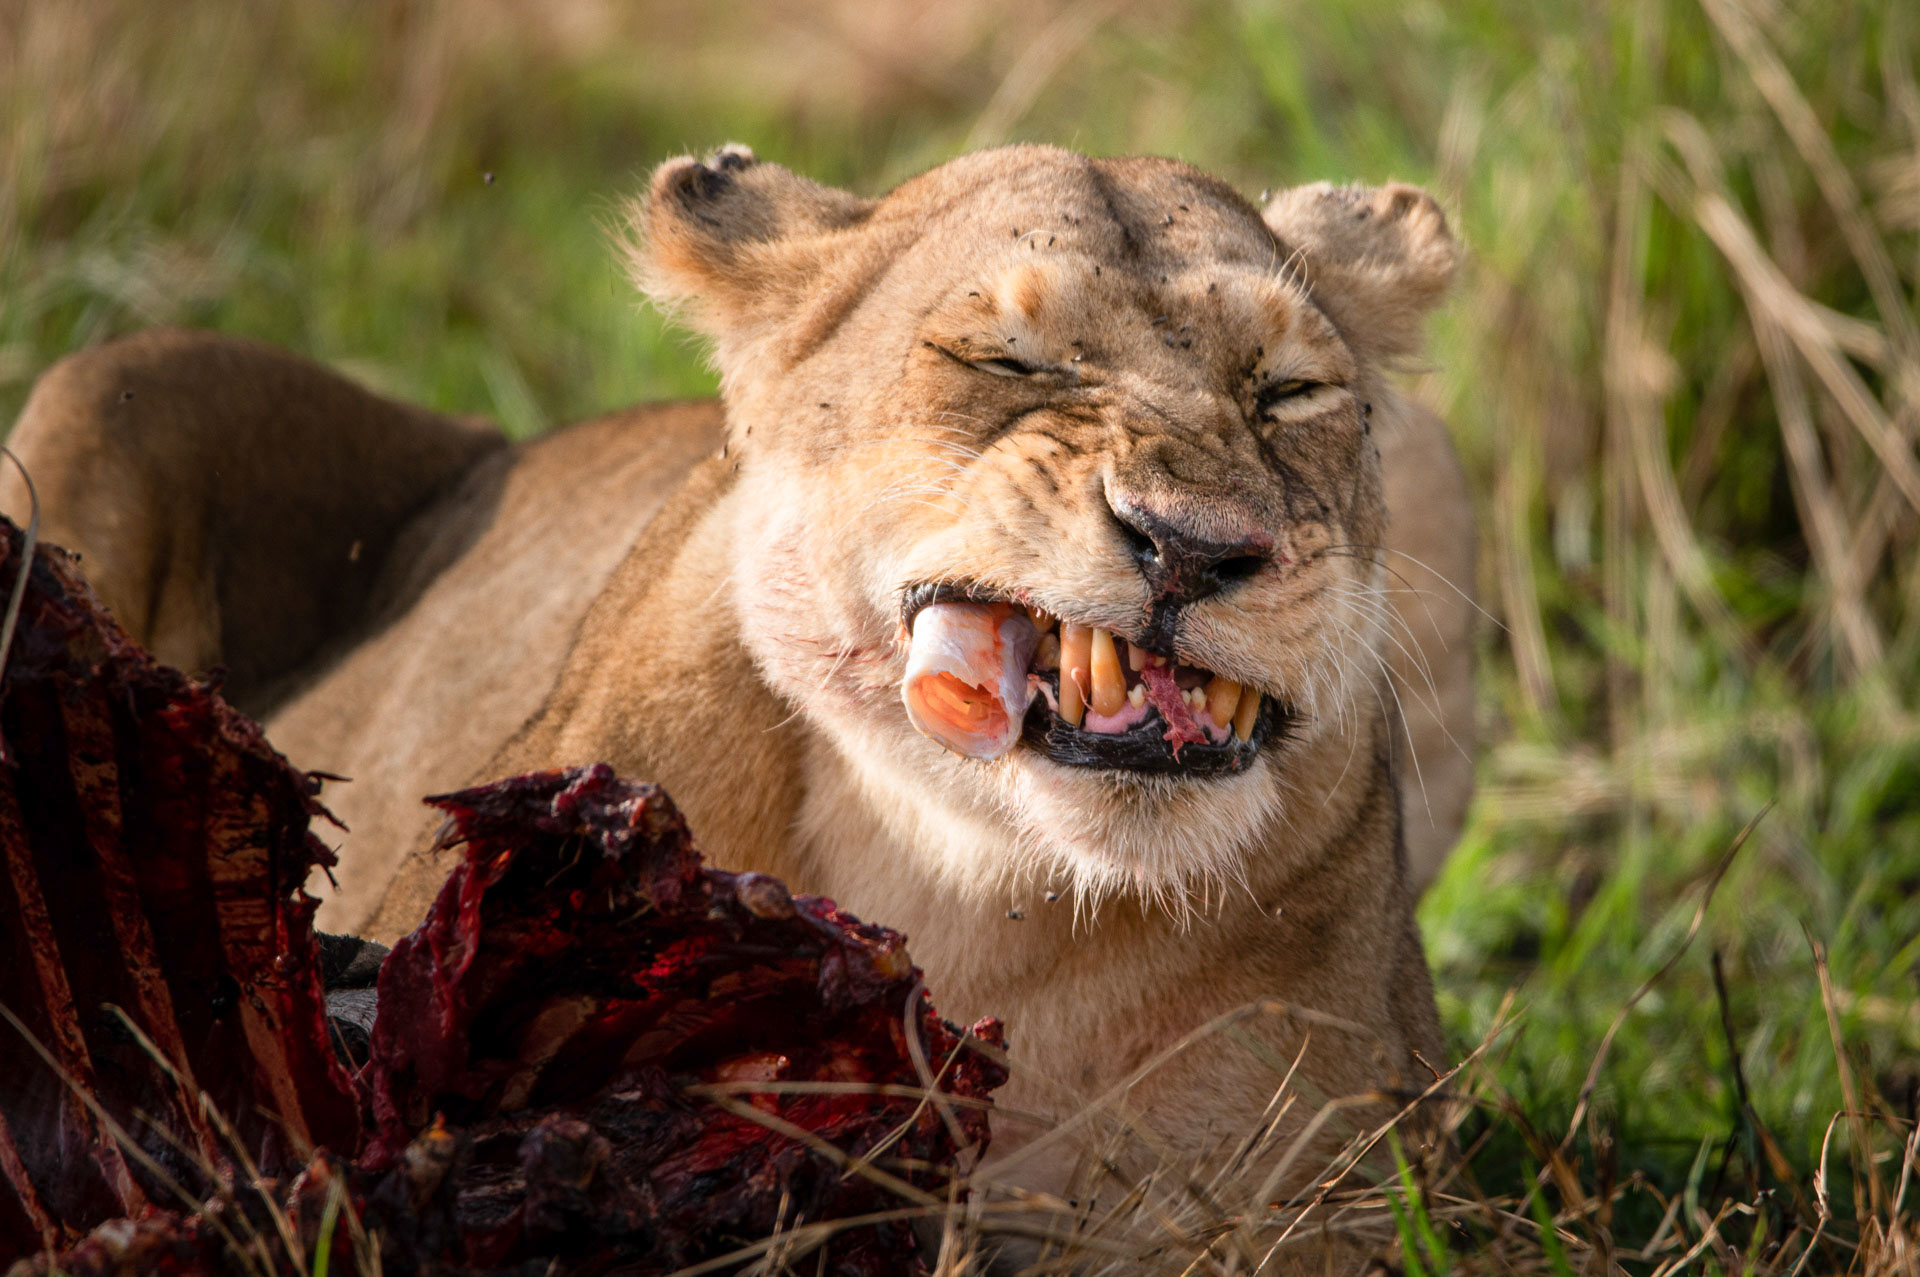 Having the time and space to catch small moments — like a lion having a snack